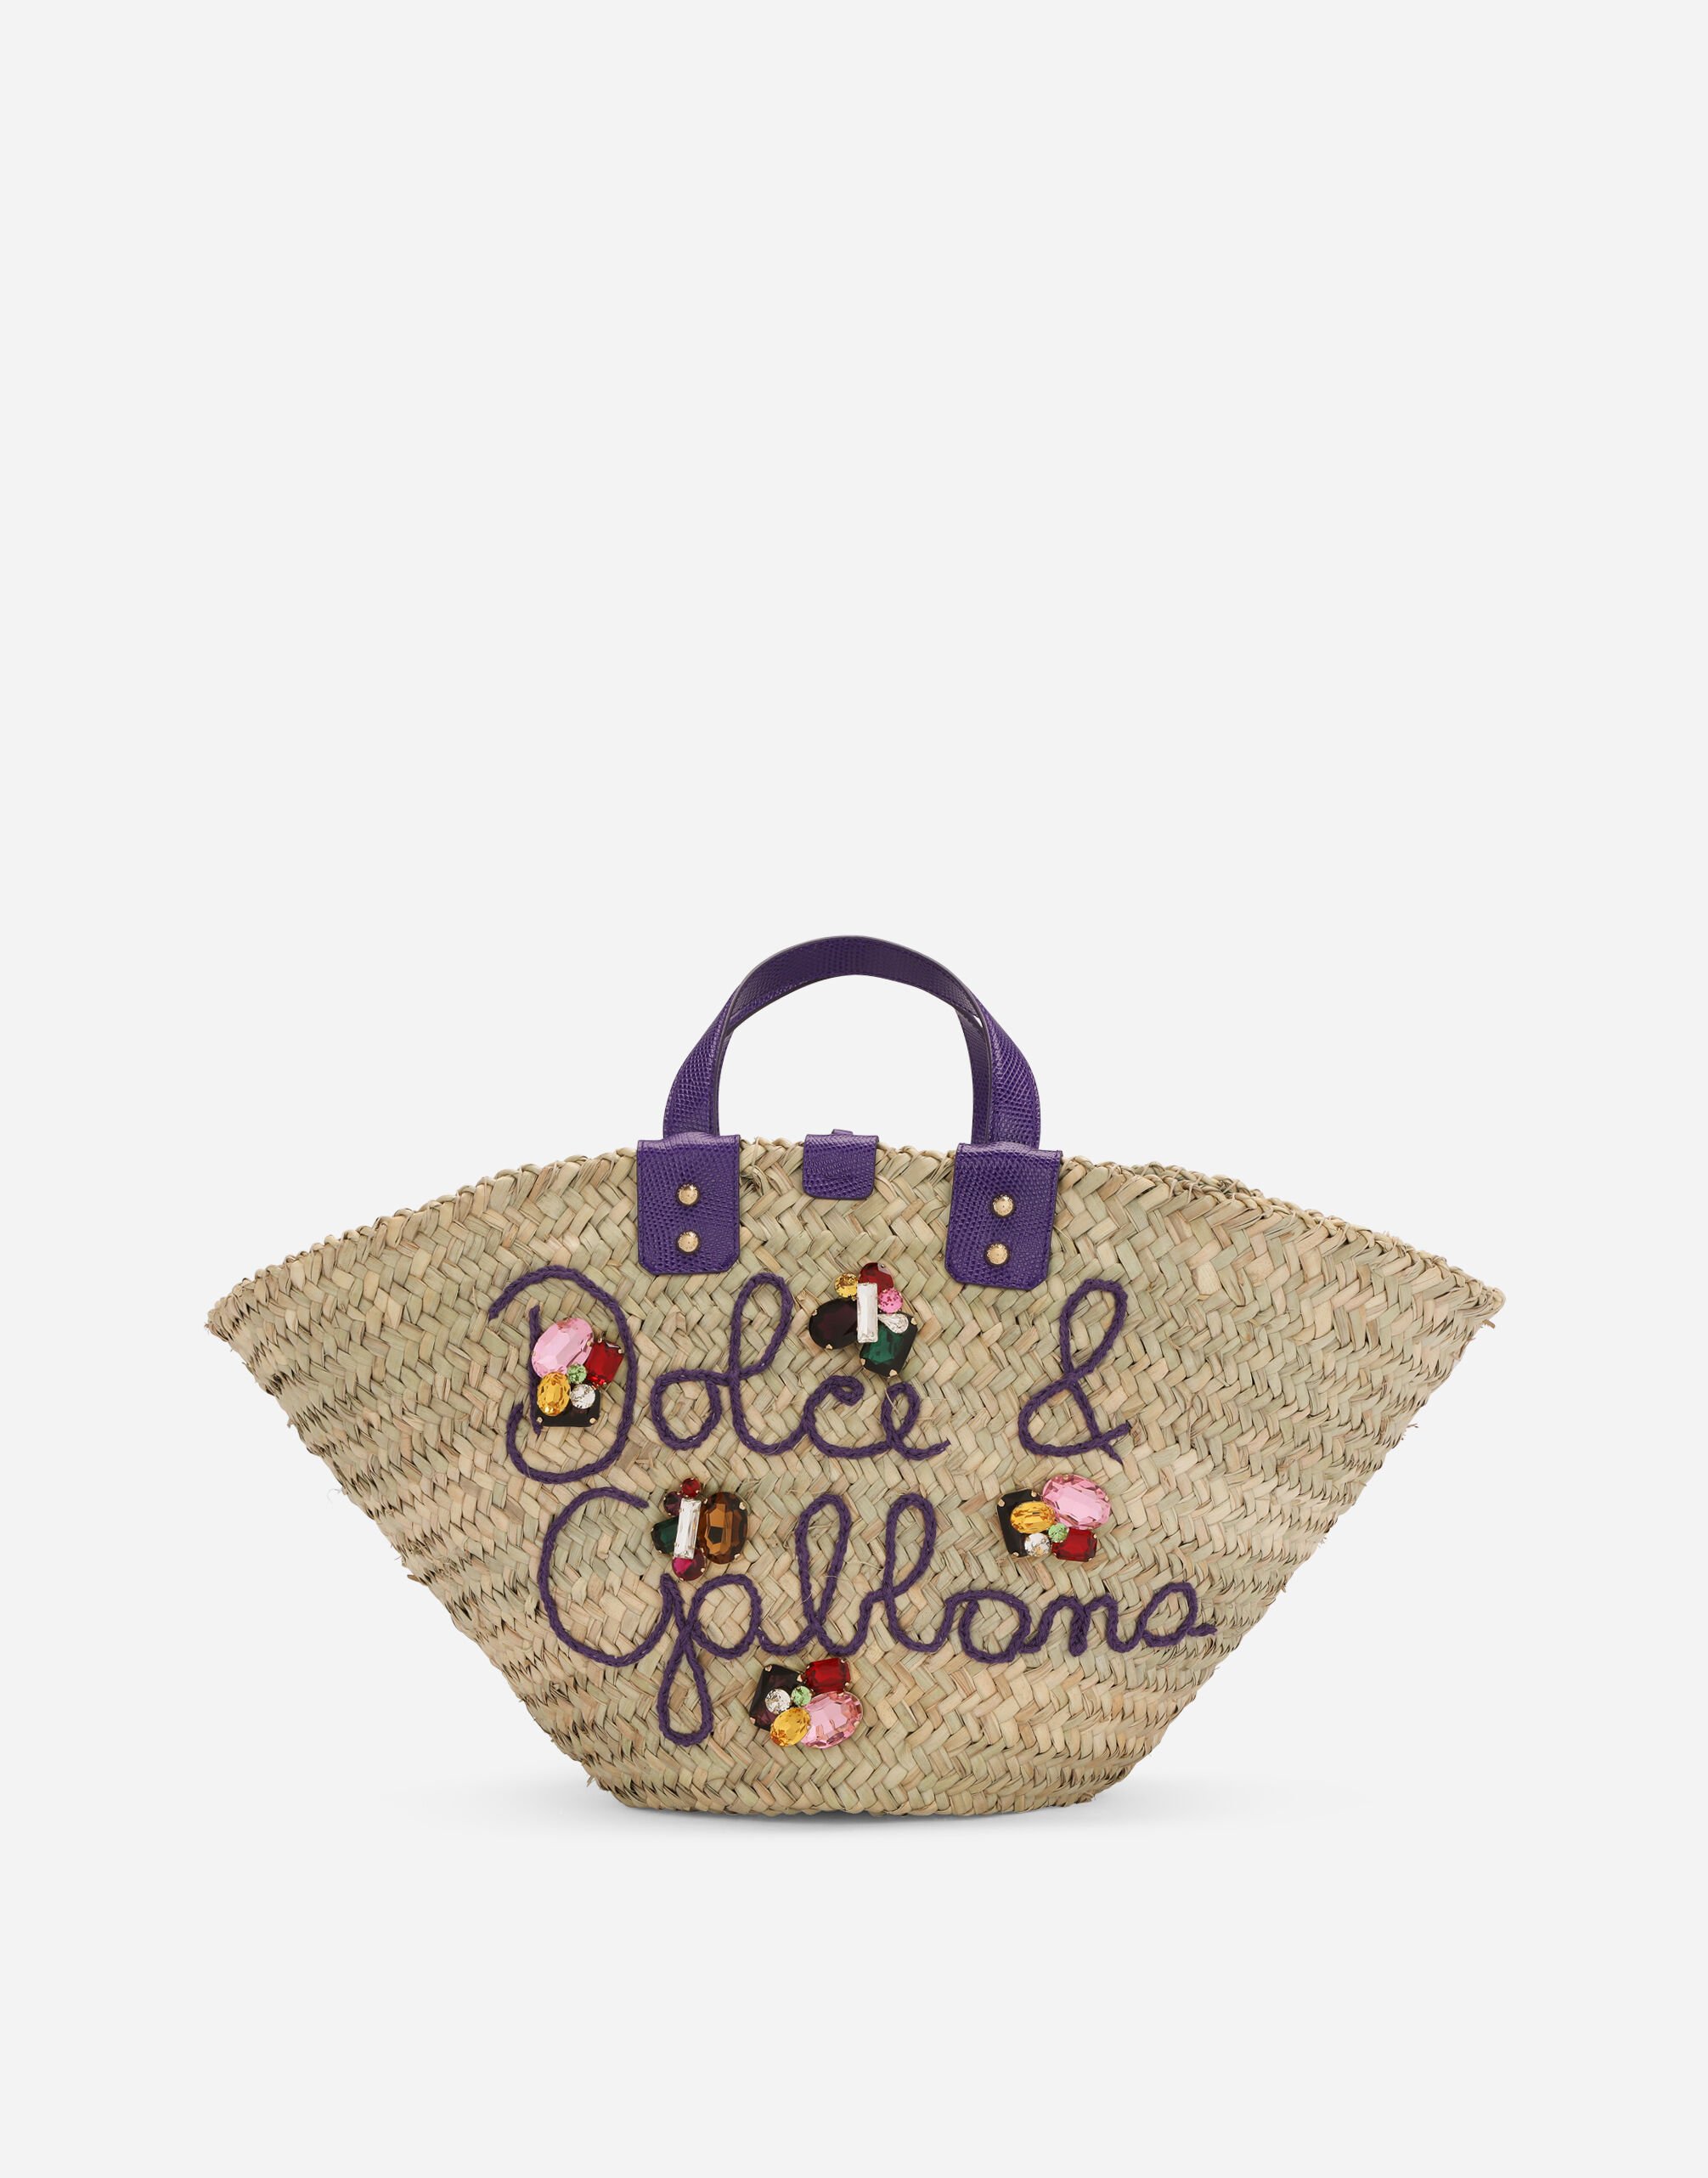 Dolce & Gabbana Straw Kendra bag with embroidery Multicolor BB7270AR355